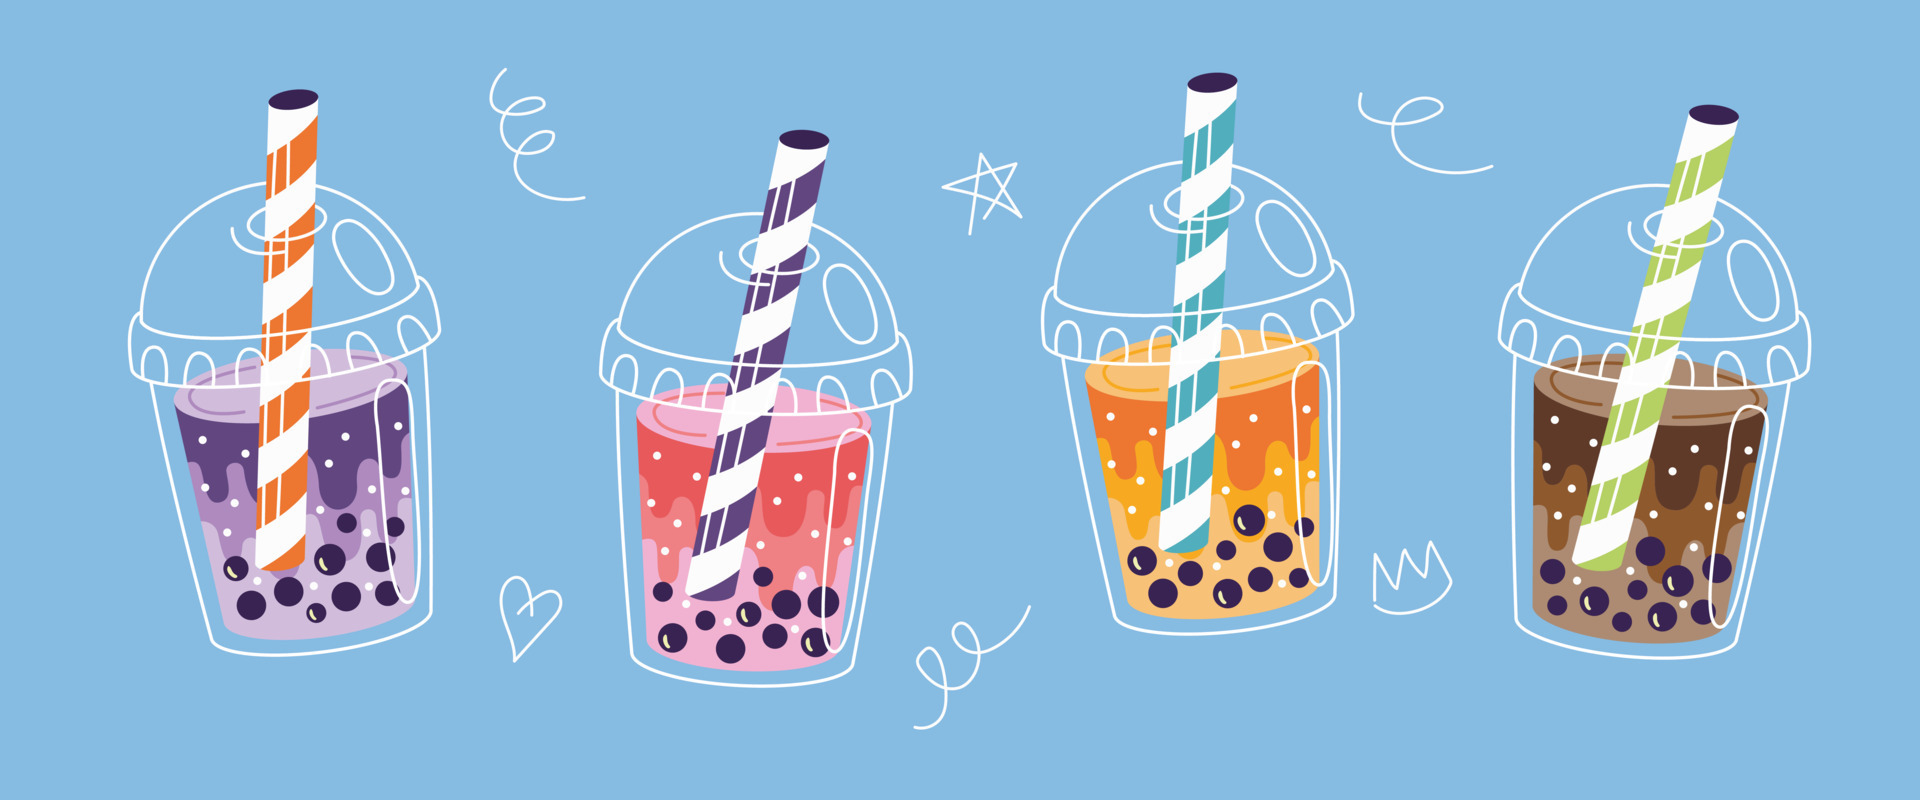 https://static.vecteezy.com/system/resources/previews/009/291/992/original/set-of-four-different-bubble-tea-cups-taiwan-milk-tea-with-tapioca-pearls-boba-tea-yummy-beverages-asian-taiwanese-soft-drink-cartoon-style-hand-drawn-colored-trendy-illustration-vector.jpg